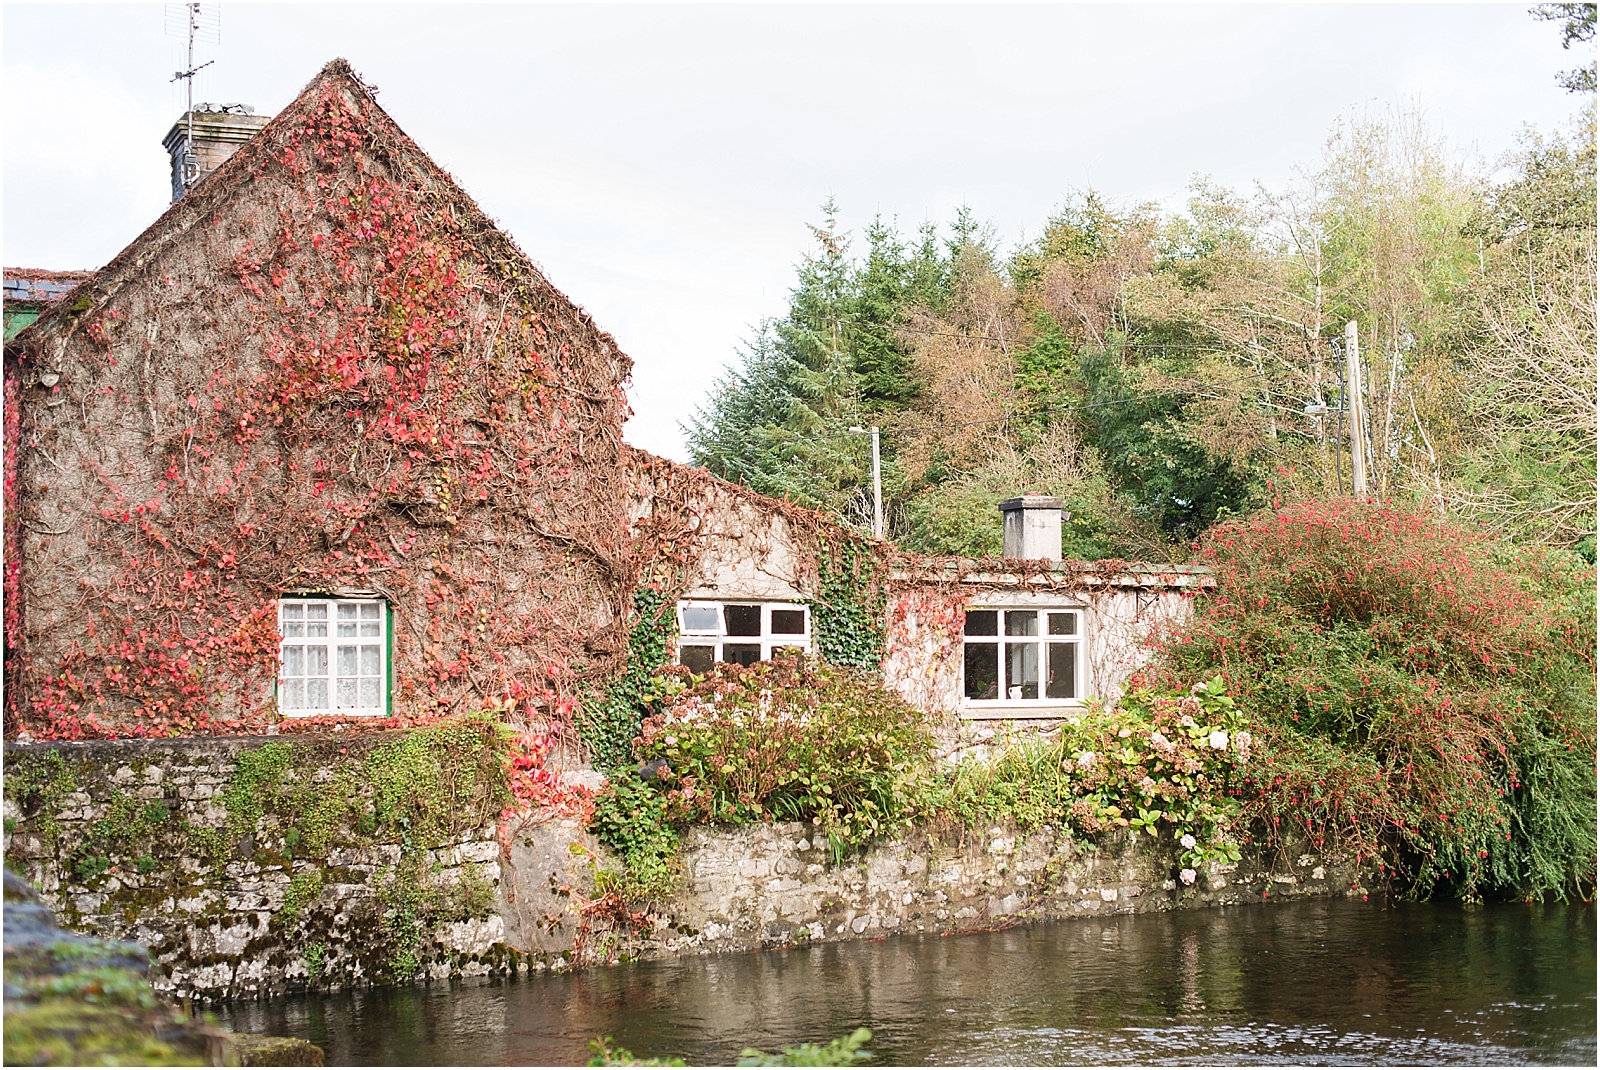 michelle and sara, michelle robinson photography, autum color leaves on house, house by water, Cong Ireland, Ireland, Cong